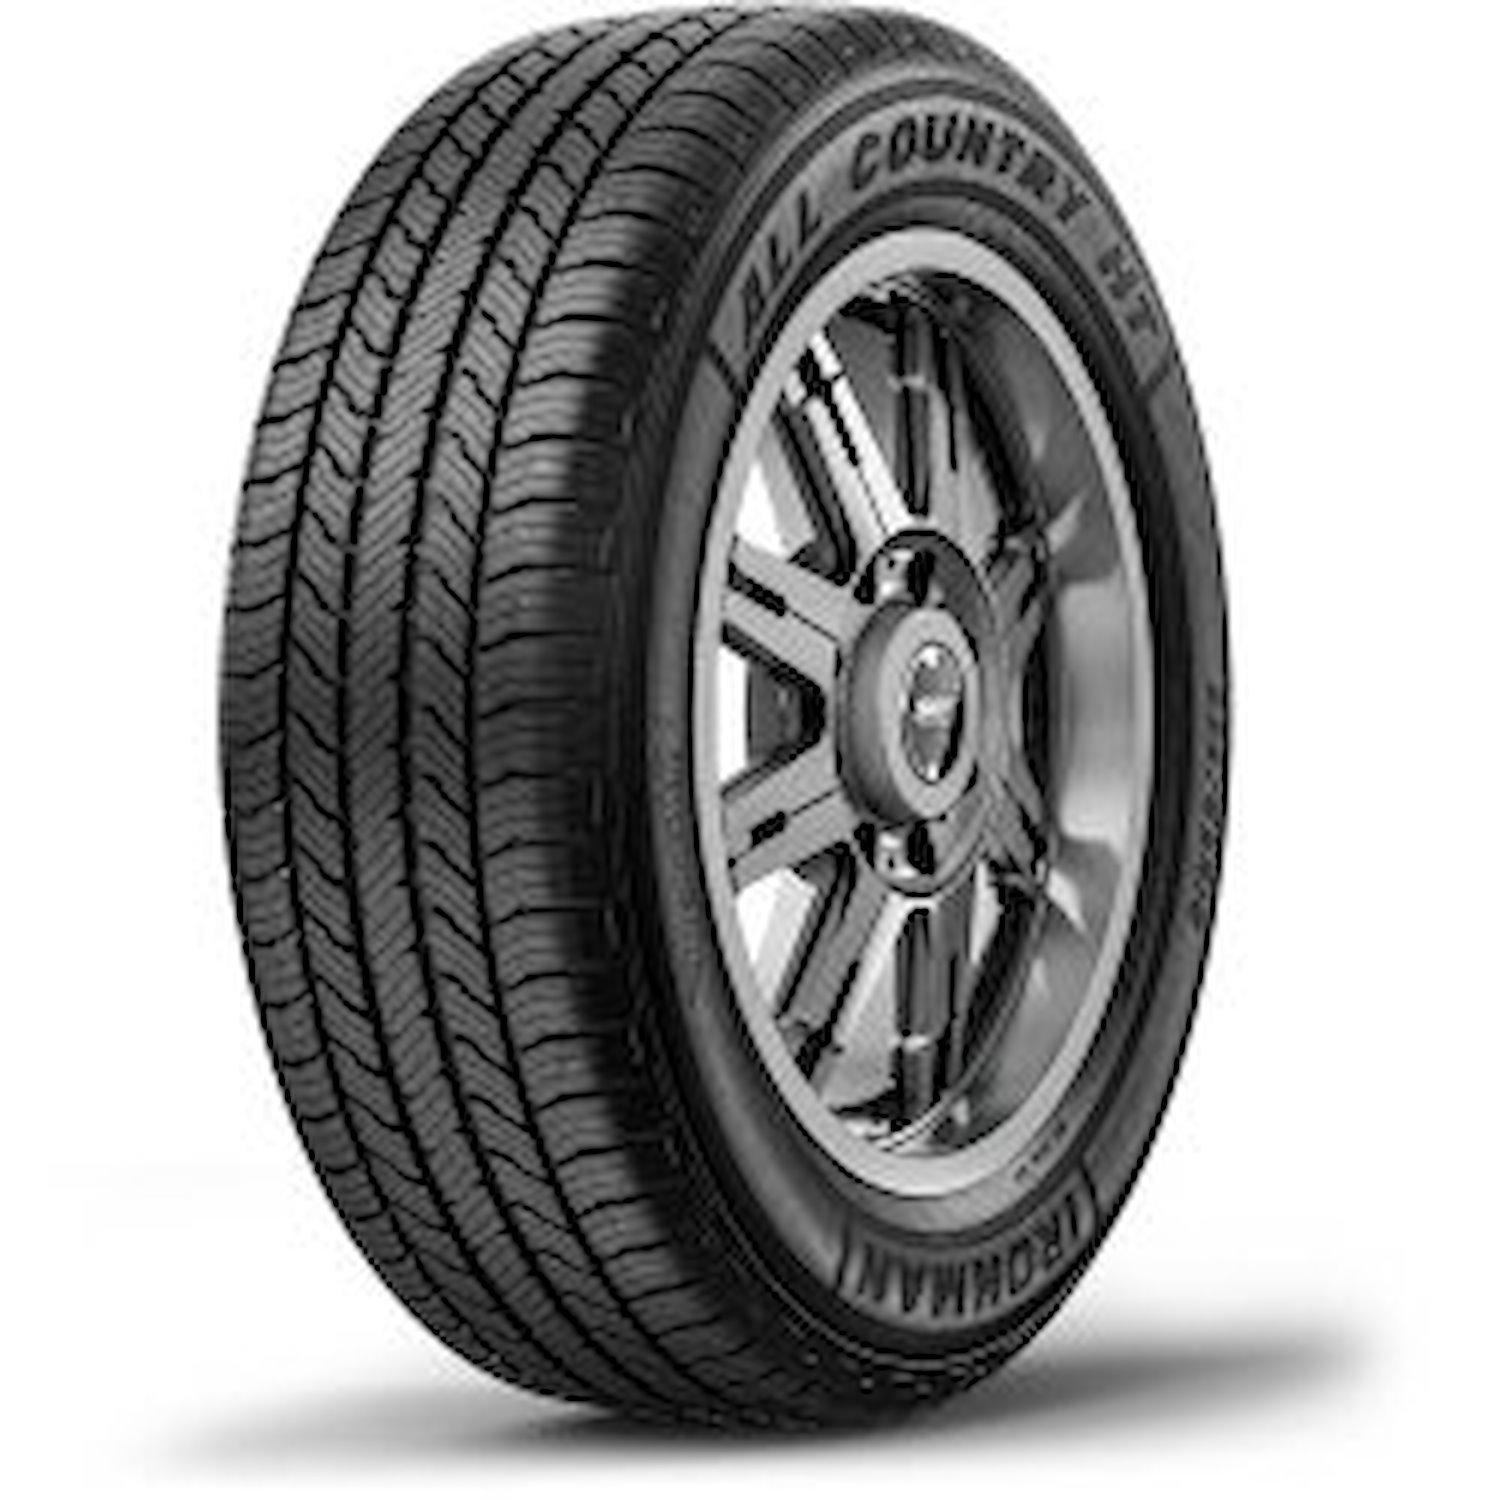 03086 All Country HT Tire, 265/50R20, 107T